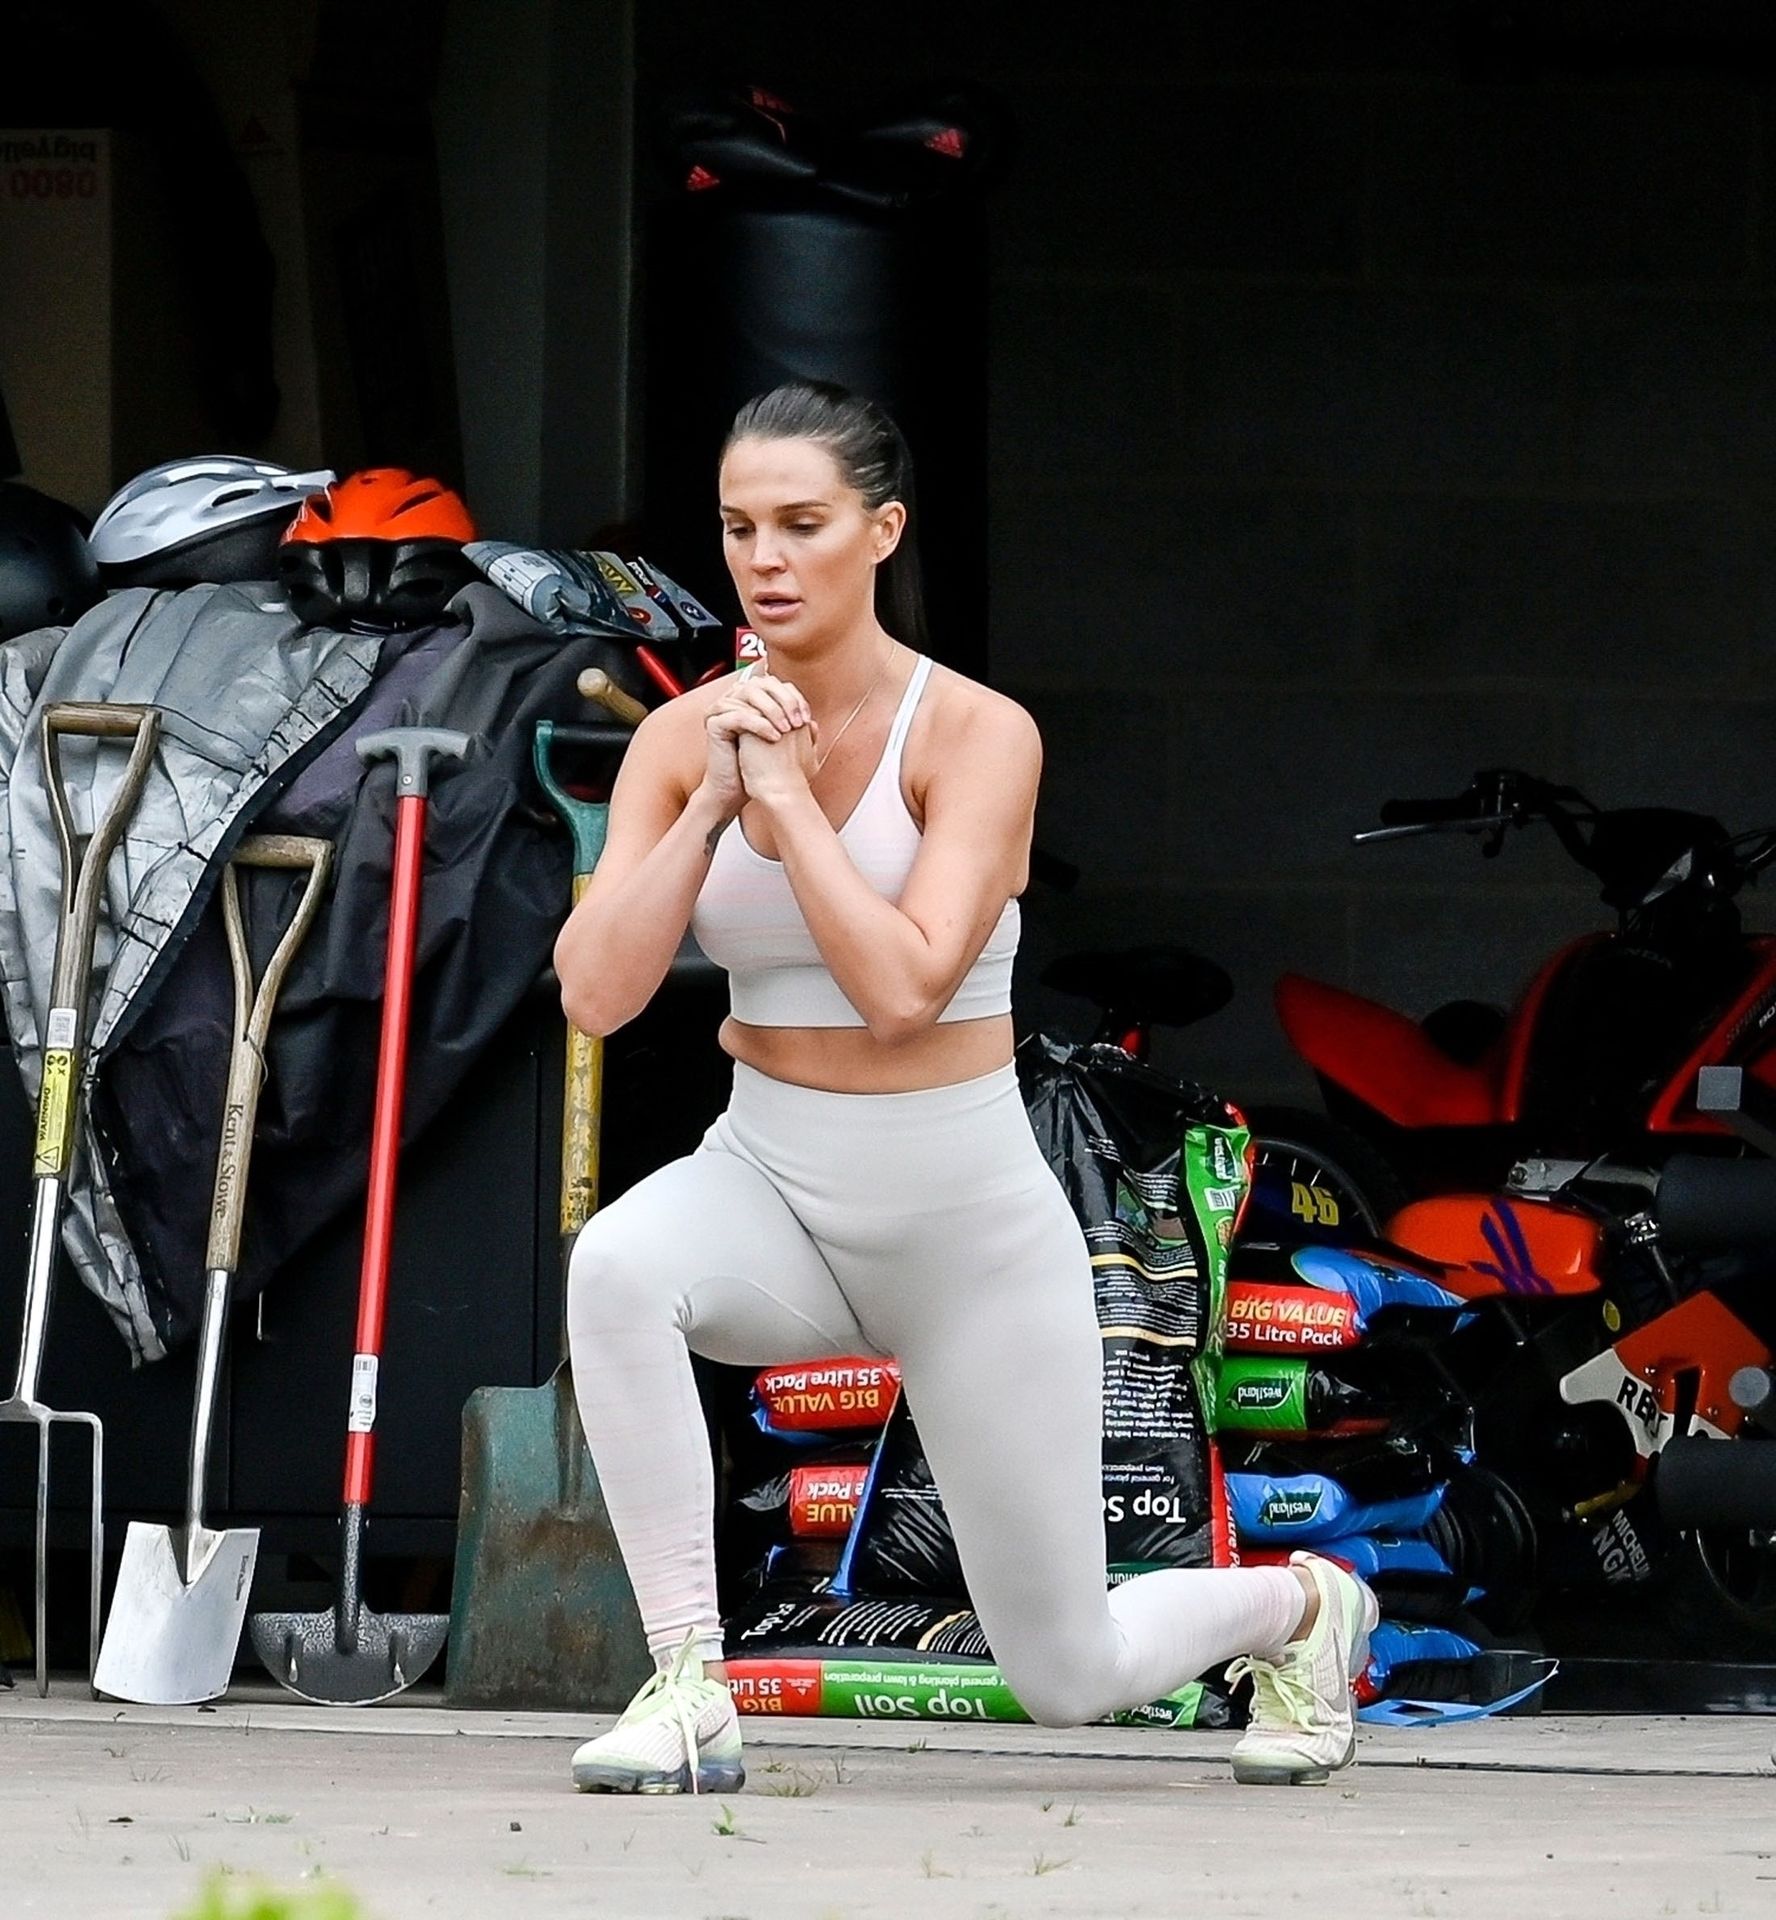 Sexy Danielle Lloyd Is Pictured While Training with Michael ONeill (46 Photos)